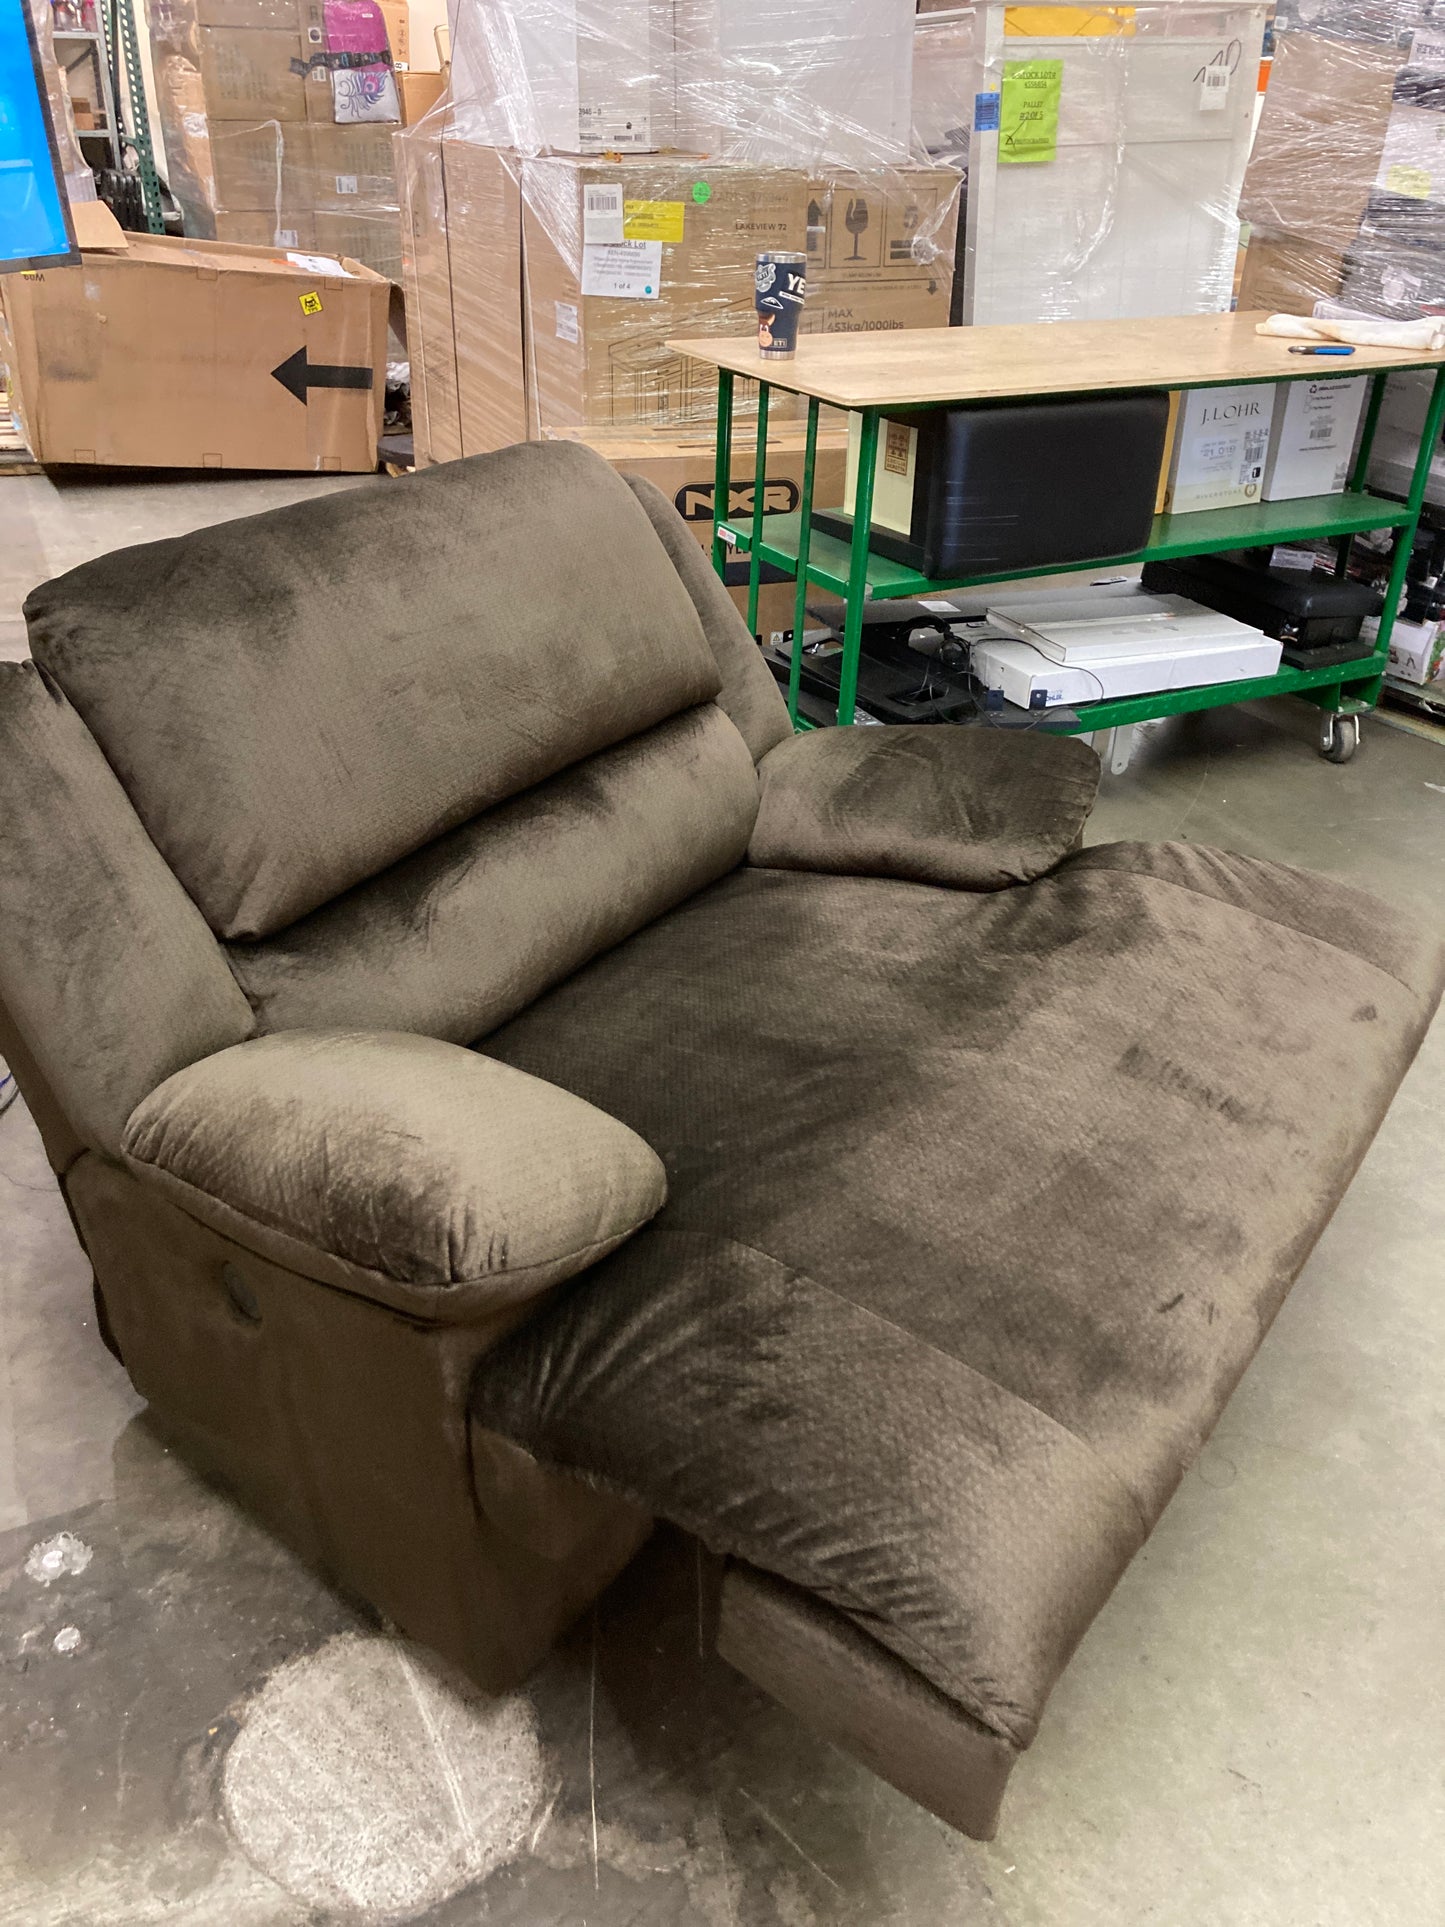 Like NEW - Signature Design by Ashley Clonmel Microfiber Power Zero Wall Wide Seat Adjustable Recliner, Brown - Retail $889 Default Title